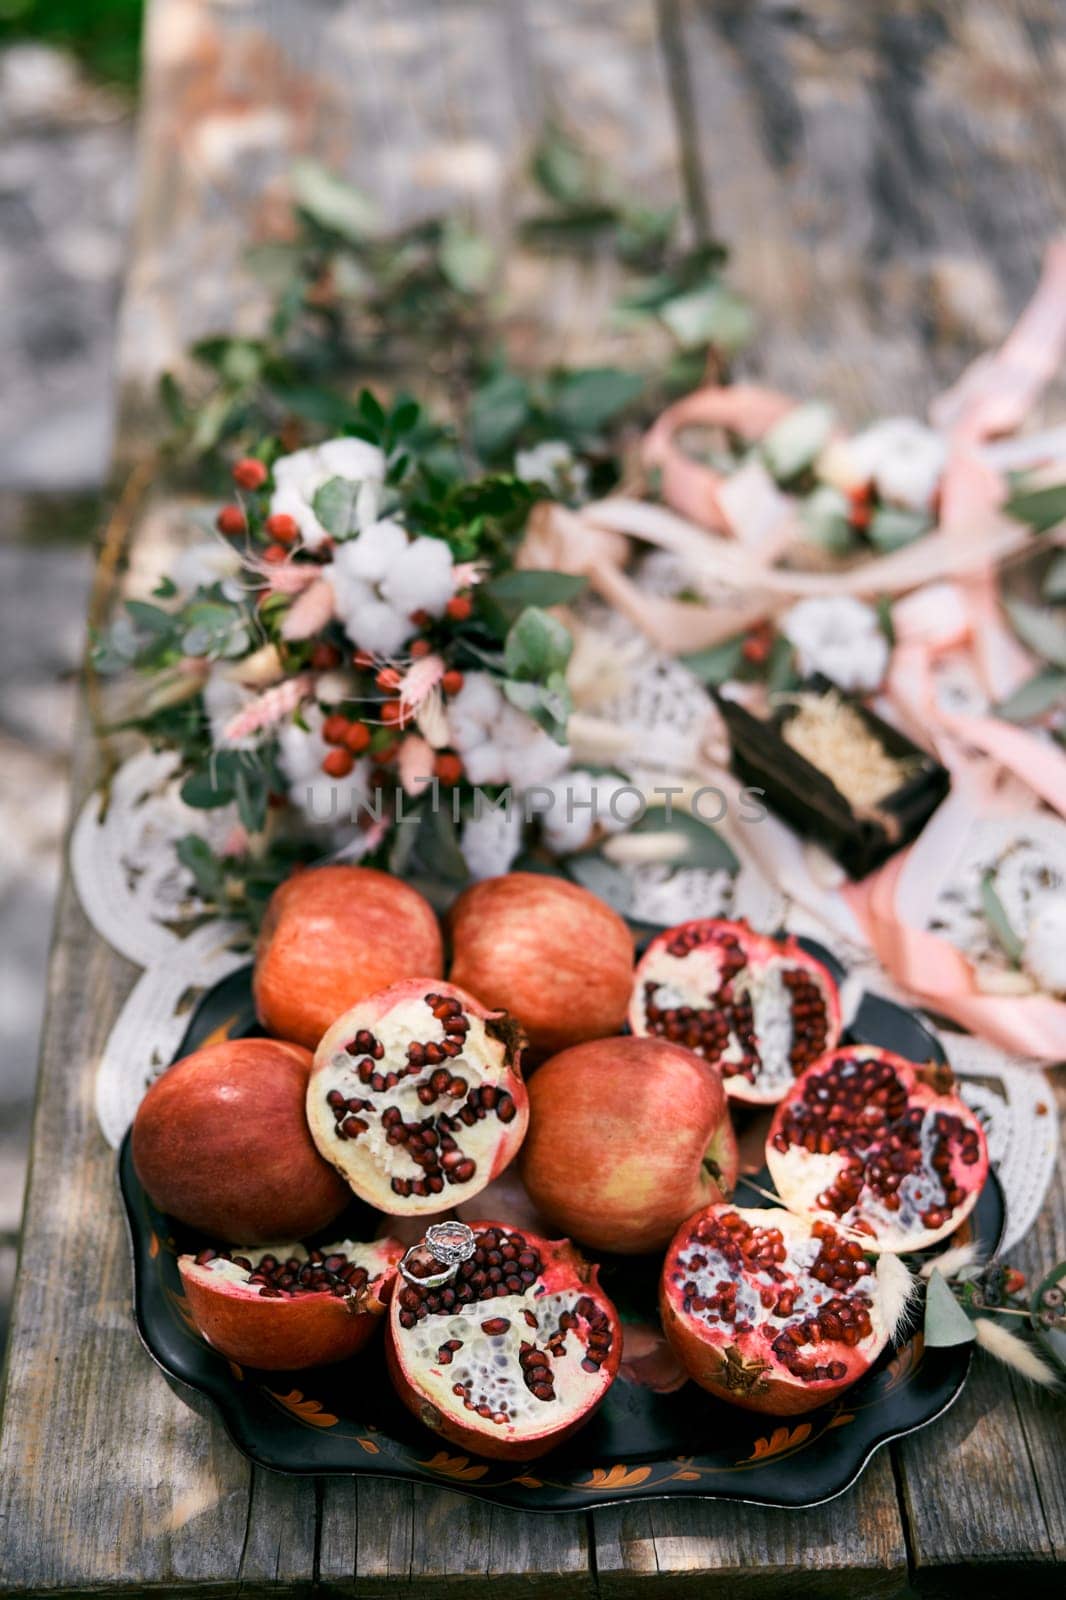 Wedding rings lie on half a pomegranate on a plate of fruit on the table next to the wedding bouquet by Nadtochiy